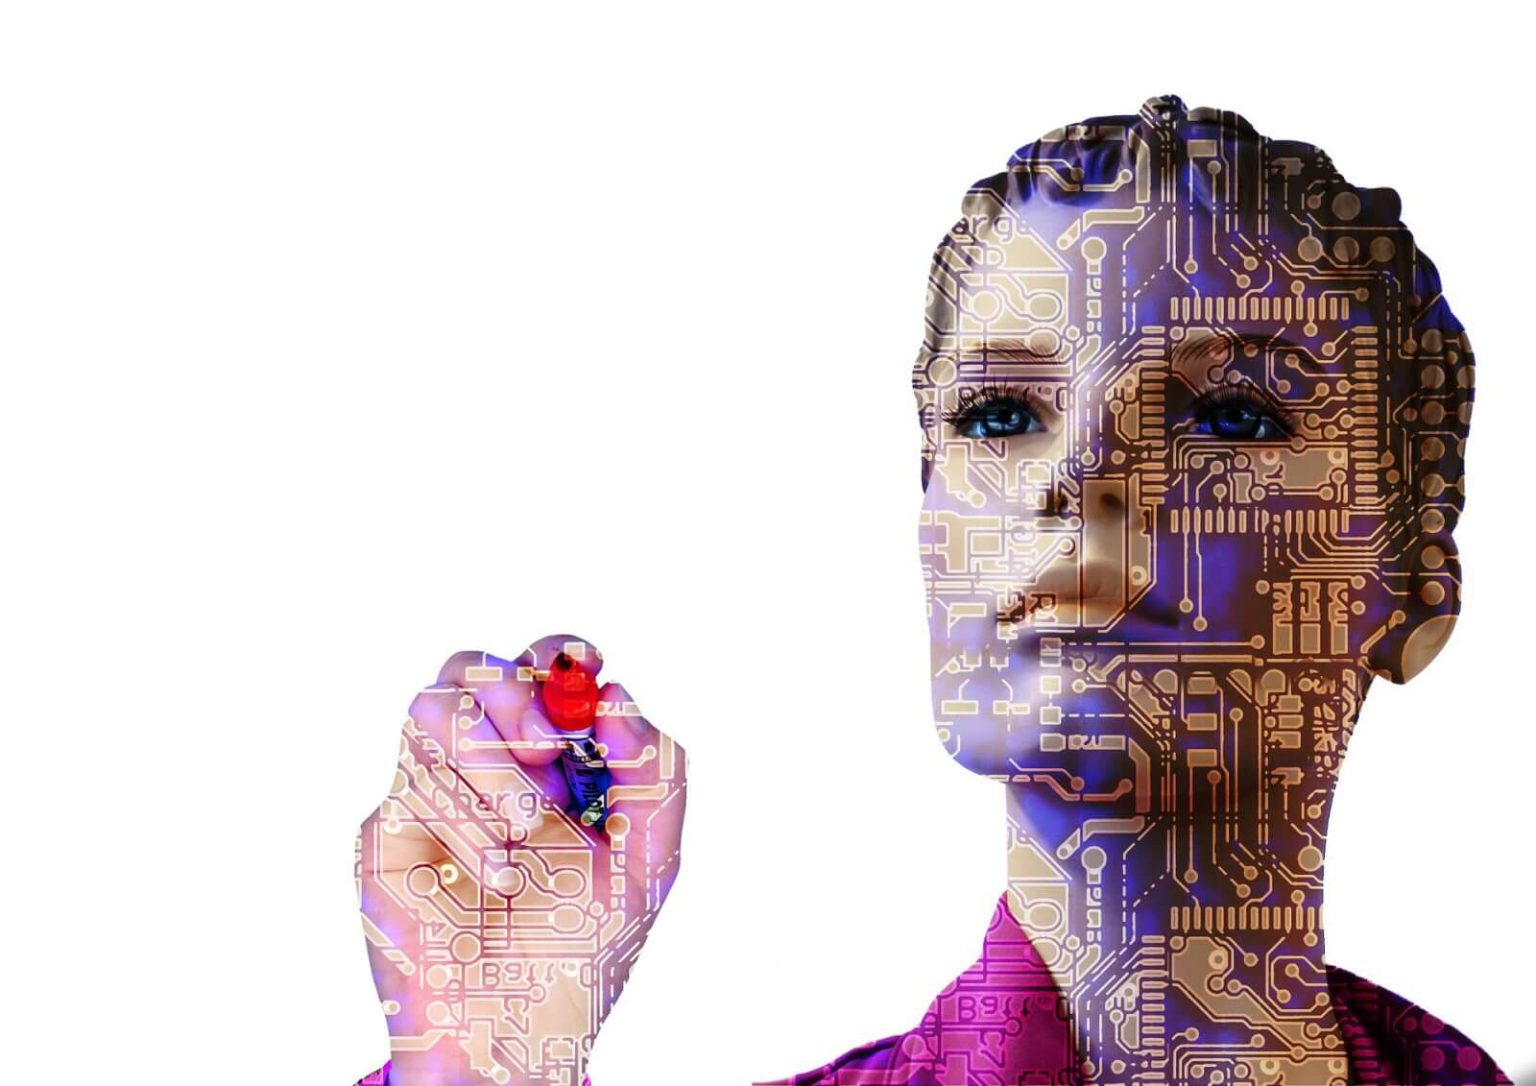 Transforming Human Resources using Artificial Intelligence